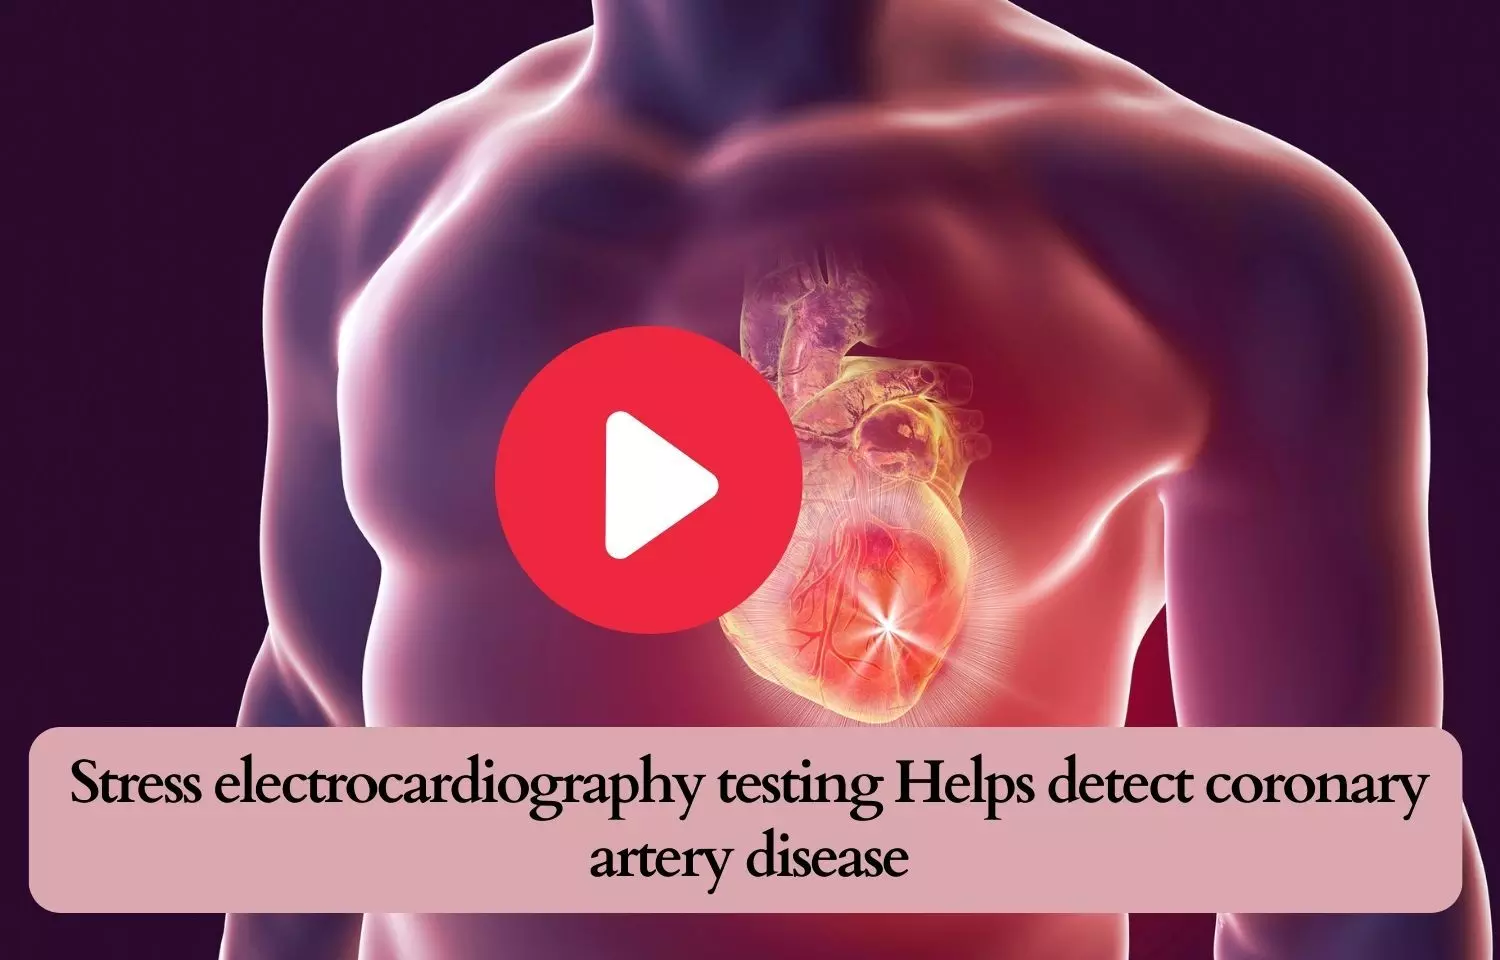 Stress electrocardiography testing Helps detect coronary artery disease